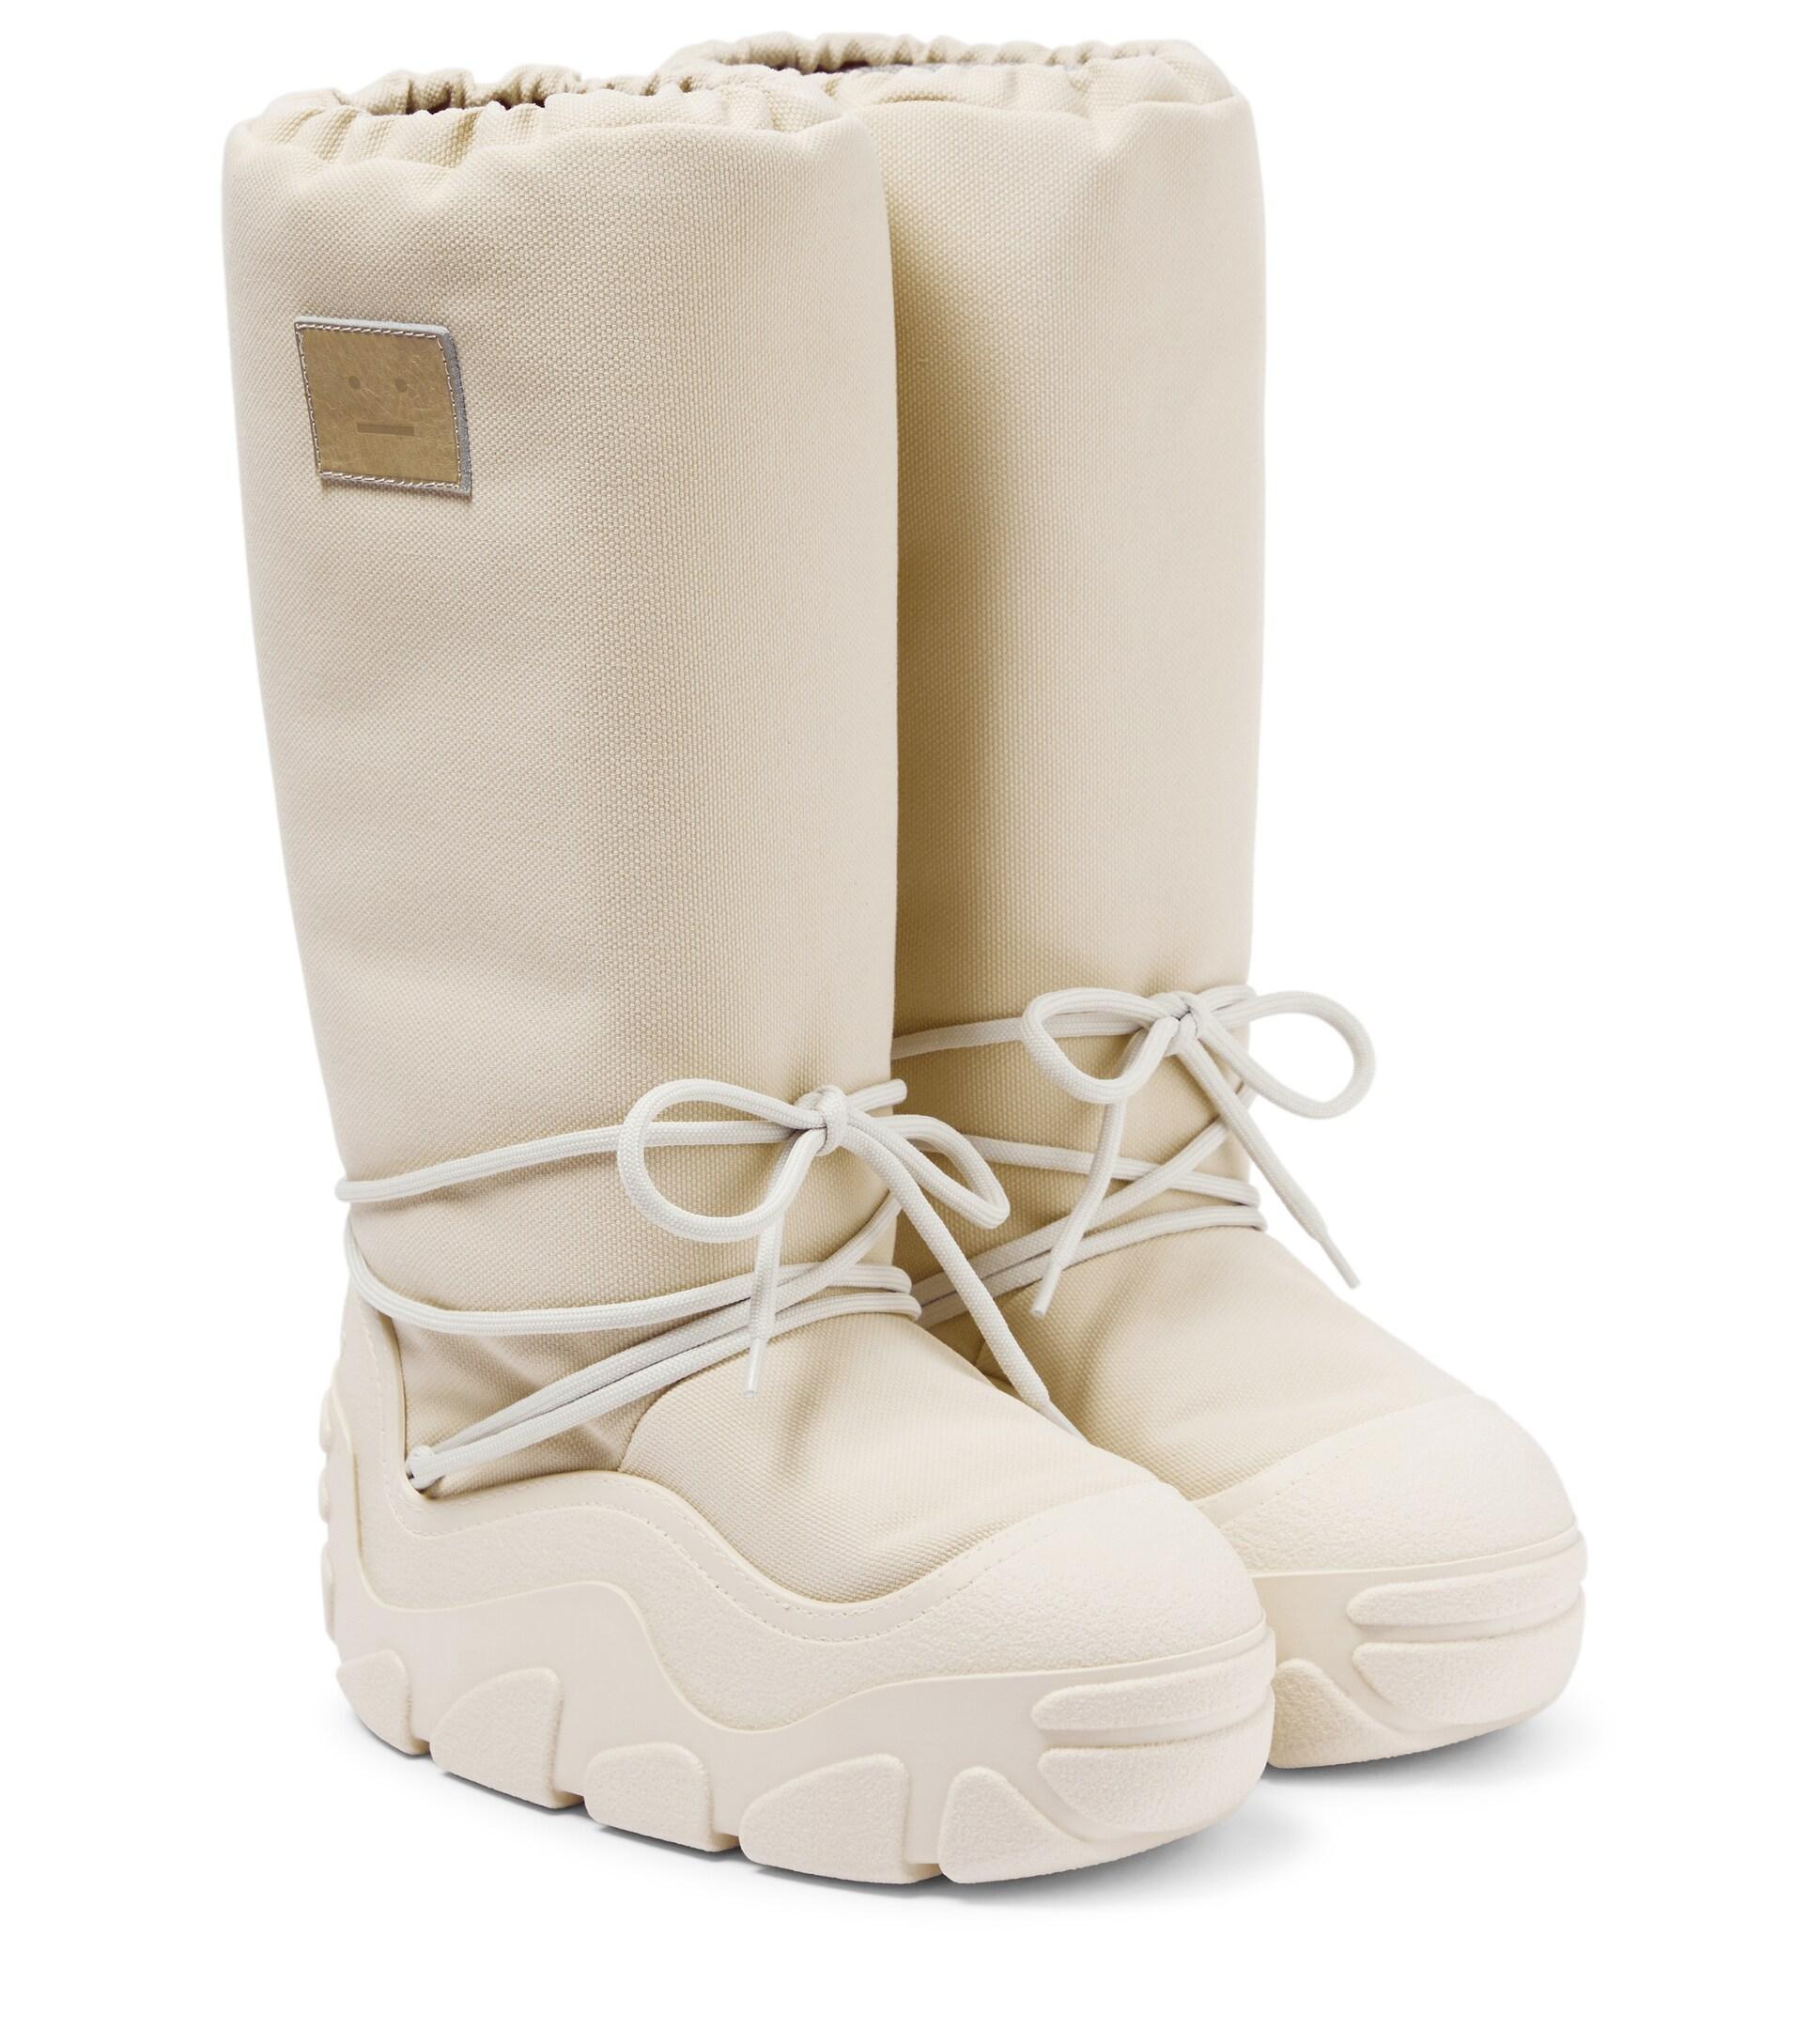 Acne Studios Face Platform Snow Boots in White | Lyst